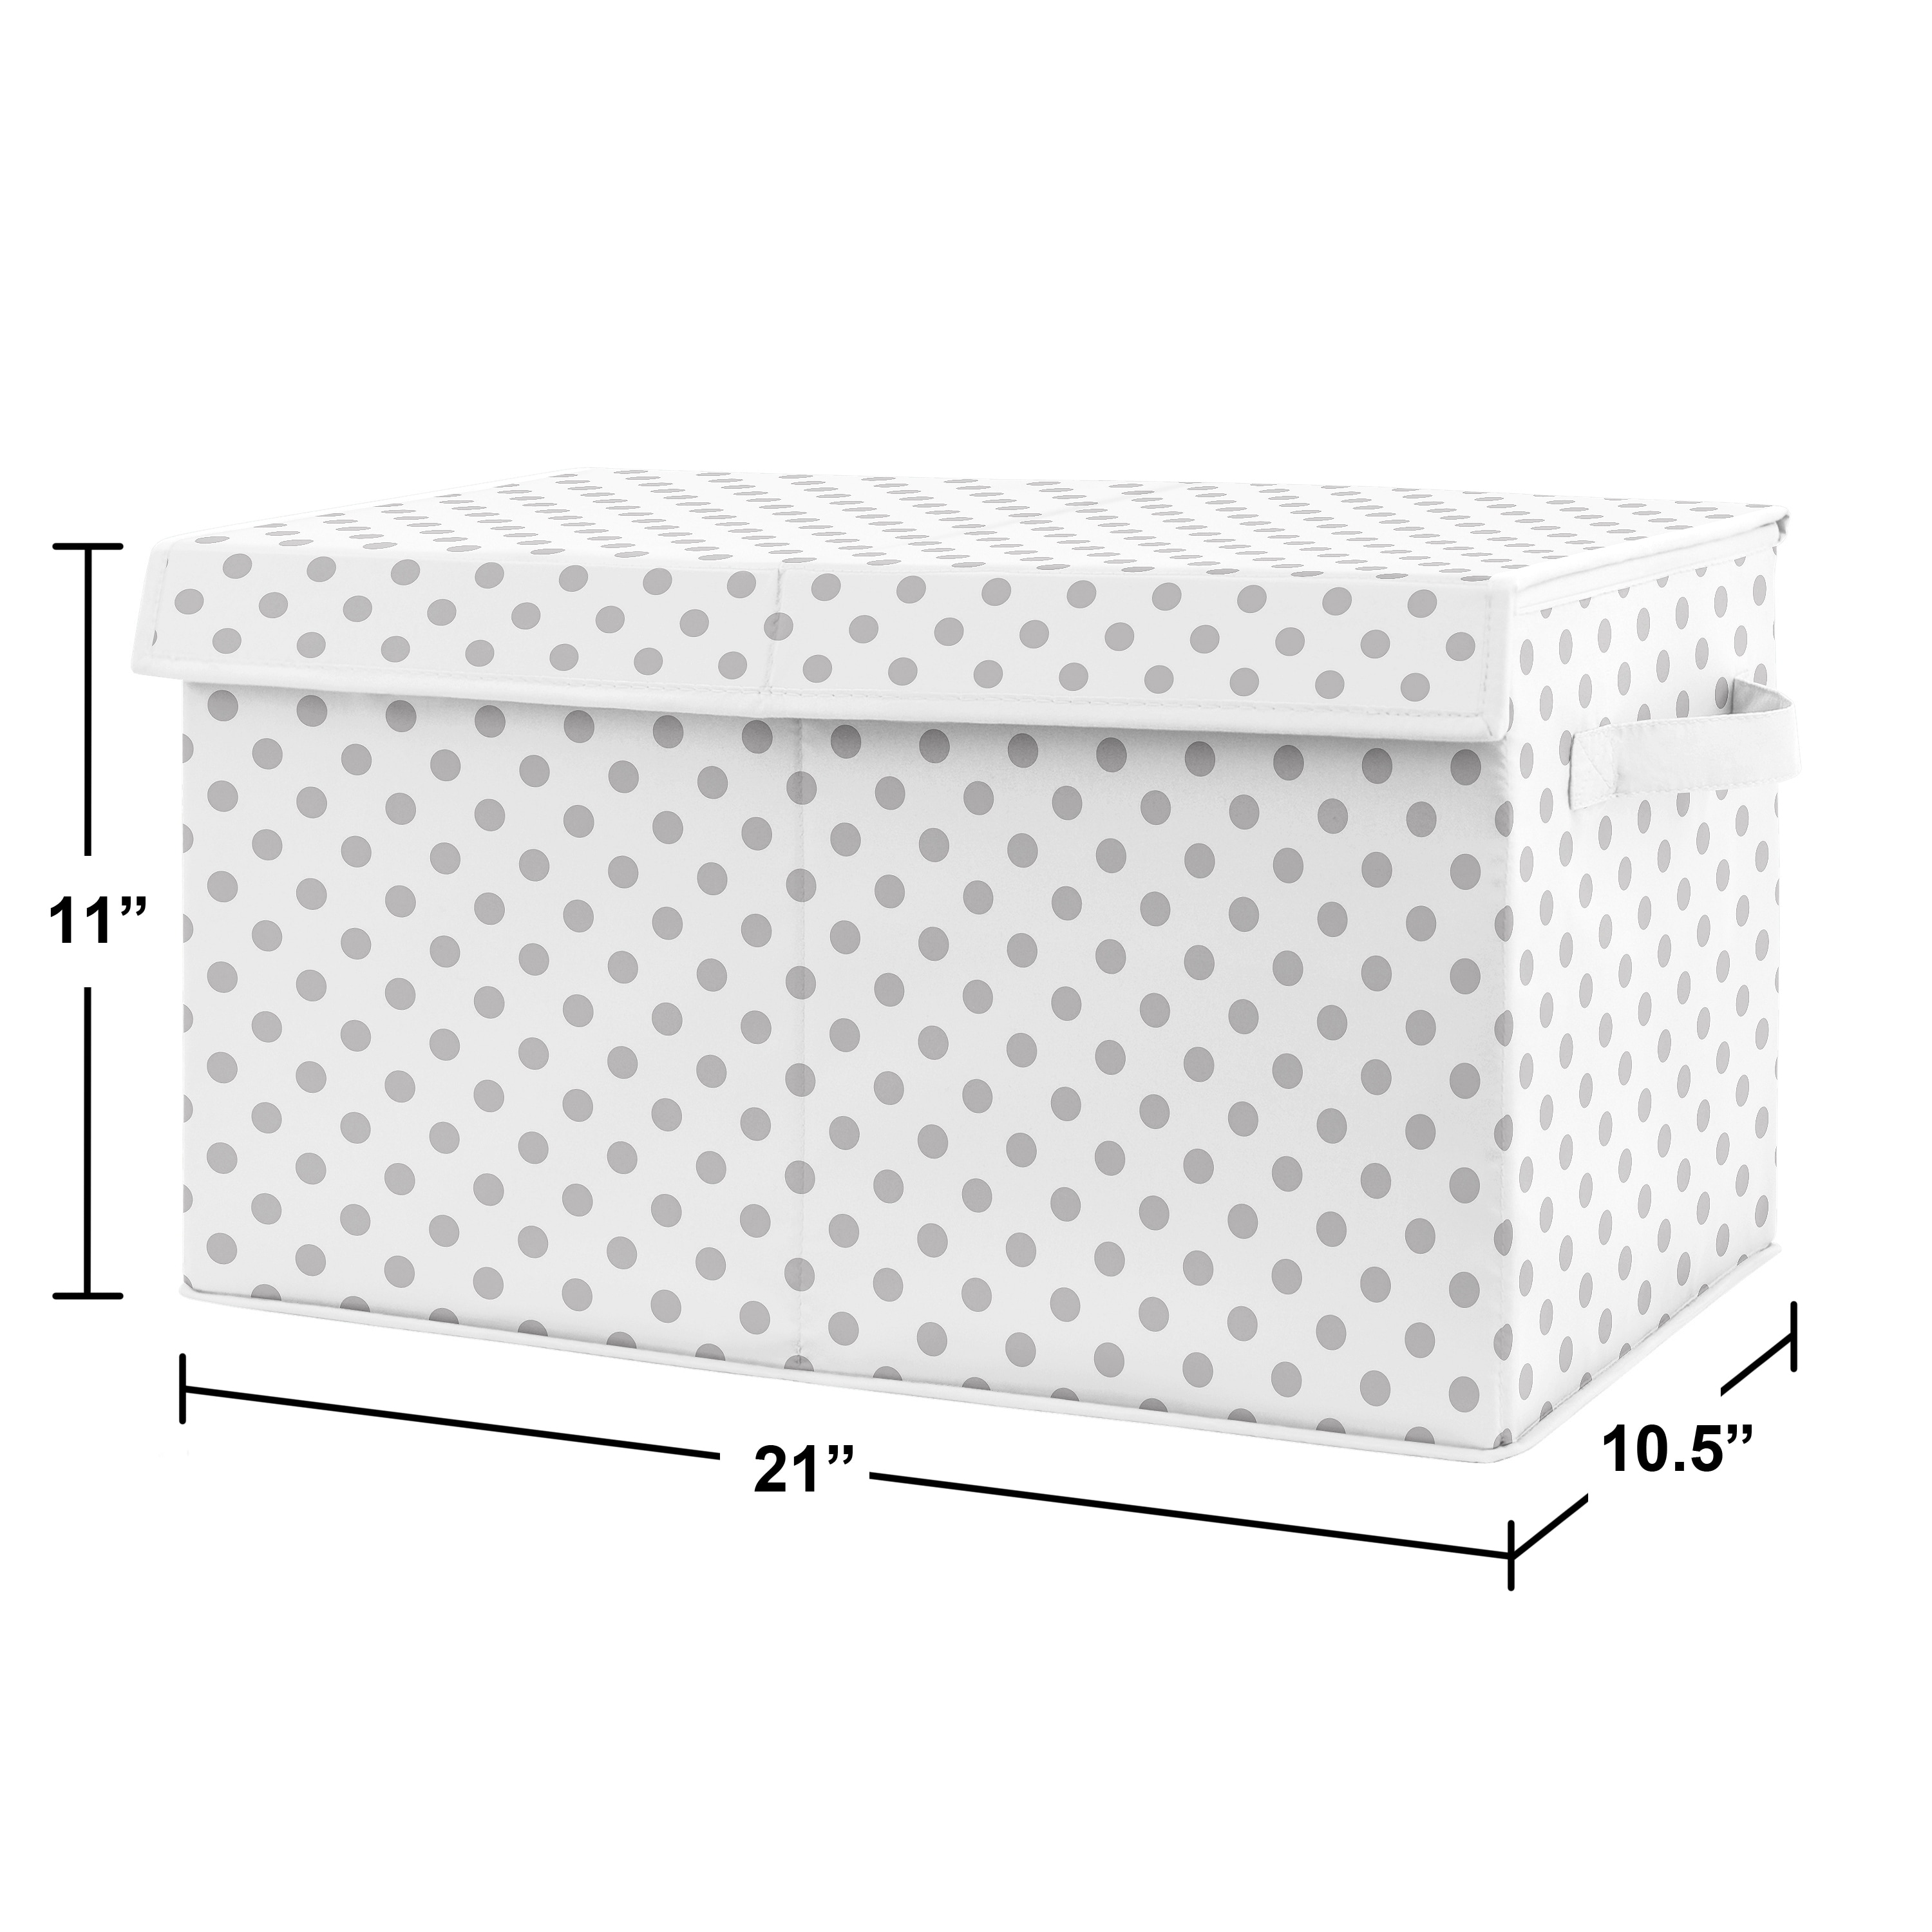 https://ak1.ostkcdn.com/images/products/is/images/direct/6ae692227a7d3f2a04bfe1bc18d555a29d345bd4/Grey-Polka-Dot-Girl-Kids-Fabric-Toy-Bin-Storage---for-Blush-Pink-Gray-Shabby-Chic-Boho-Watercolor-Floral-Rose-Flower-Collection.jpg